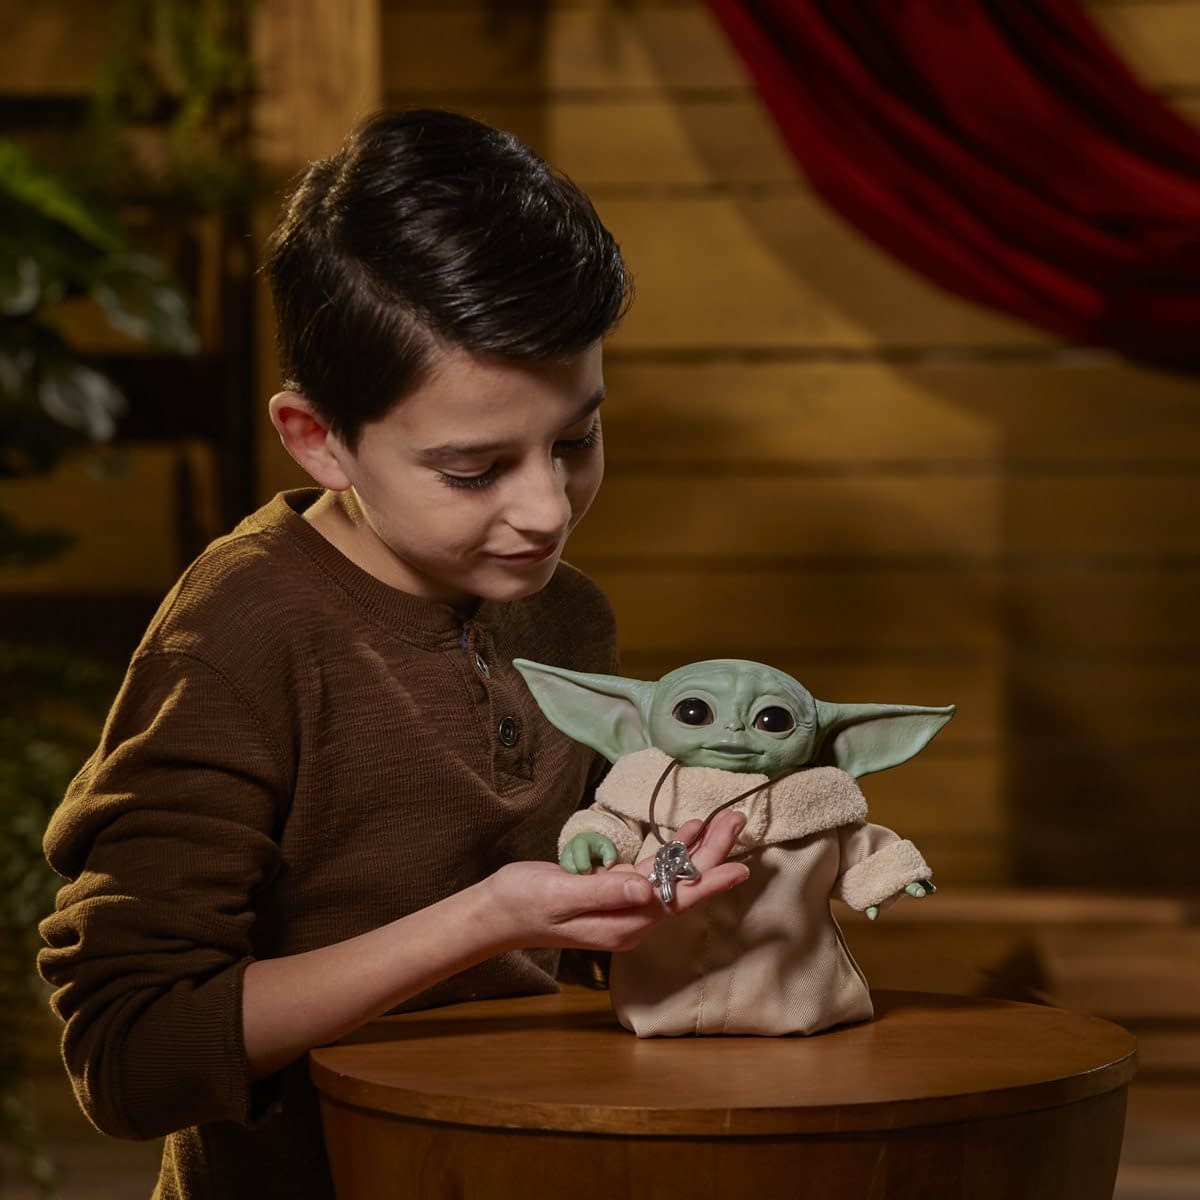 Baby Yoda Comes to Life with New Animatronic Toys from Hasbro